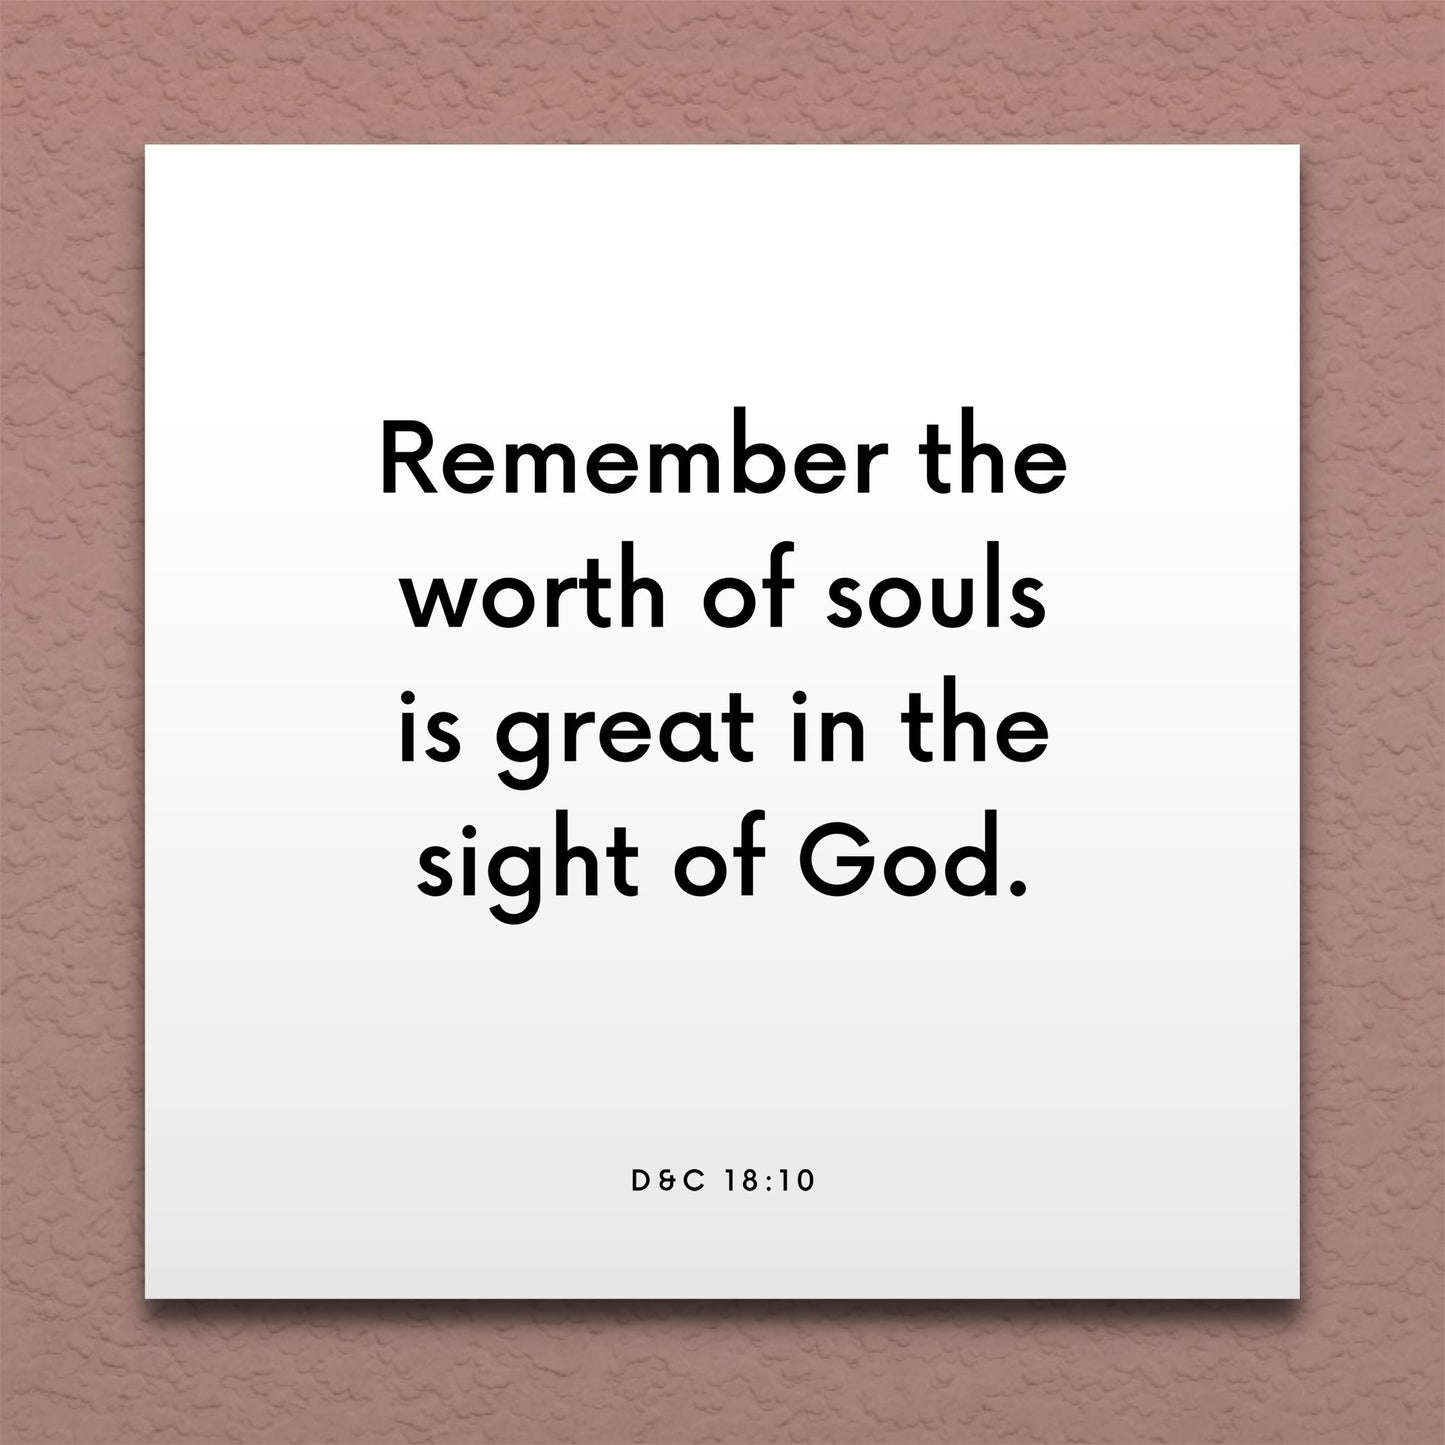 Wall-mounted scripture tile for D&C 18:10 - "Remember the worth of souls is great in the sight of God"